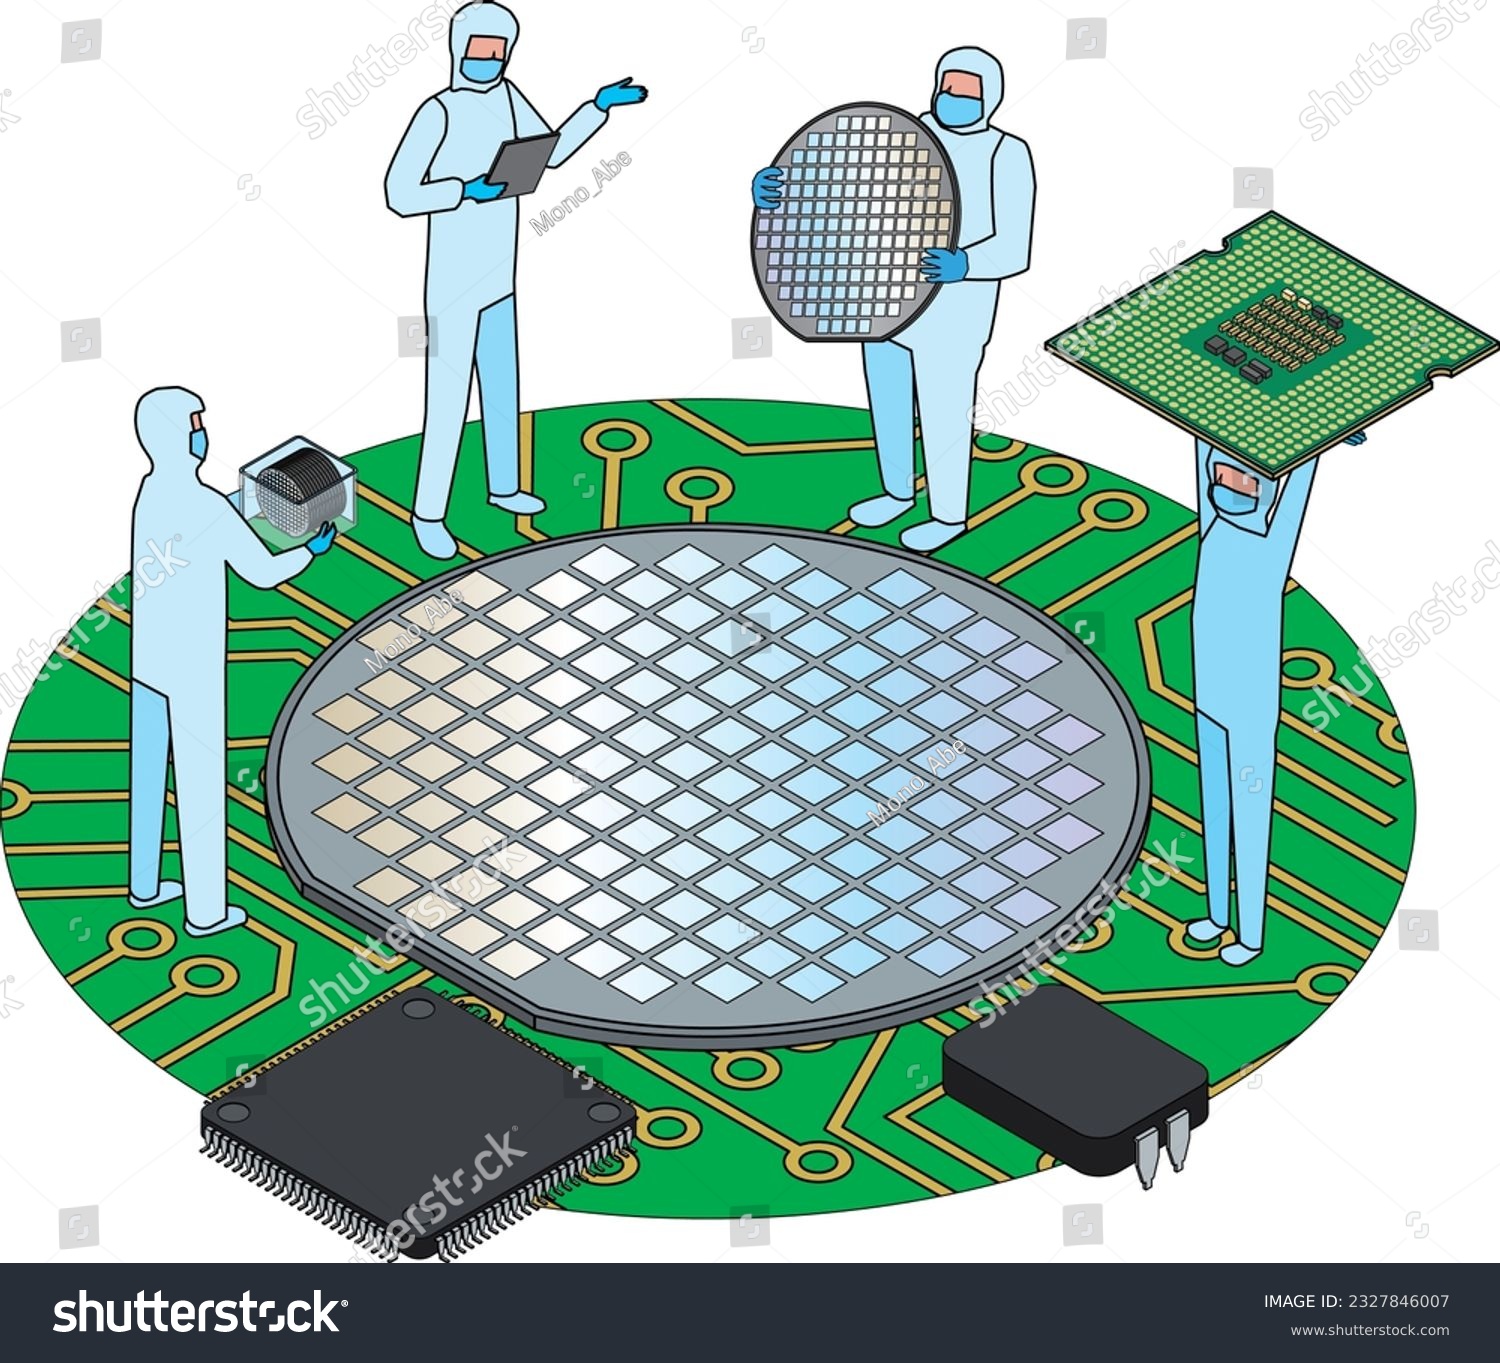 SVG of people working in the semiconductor industry svg